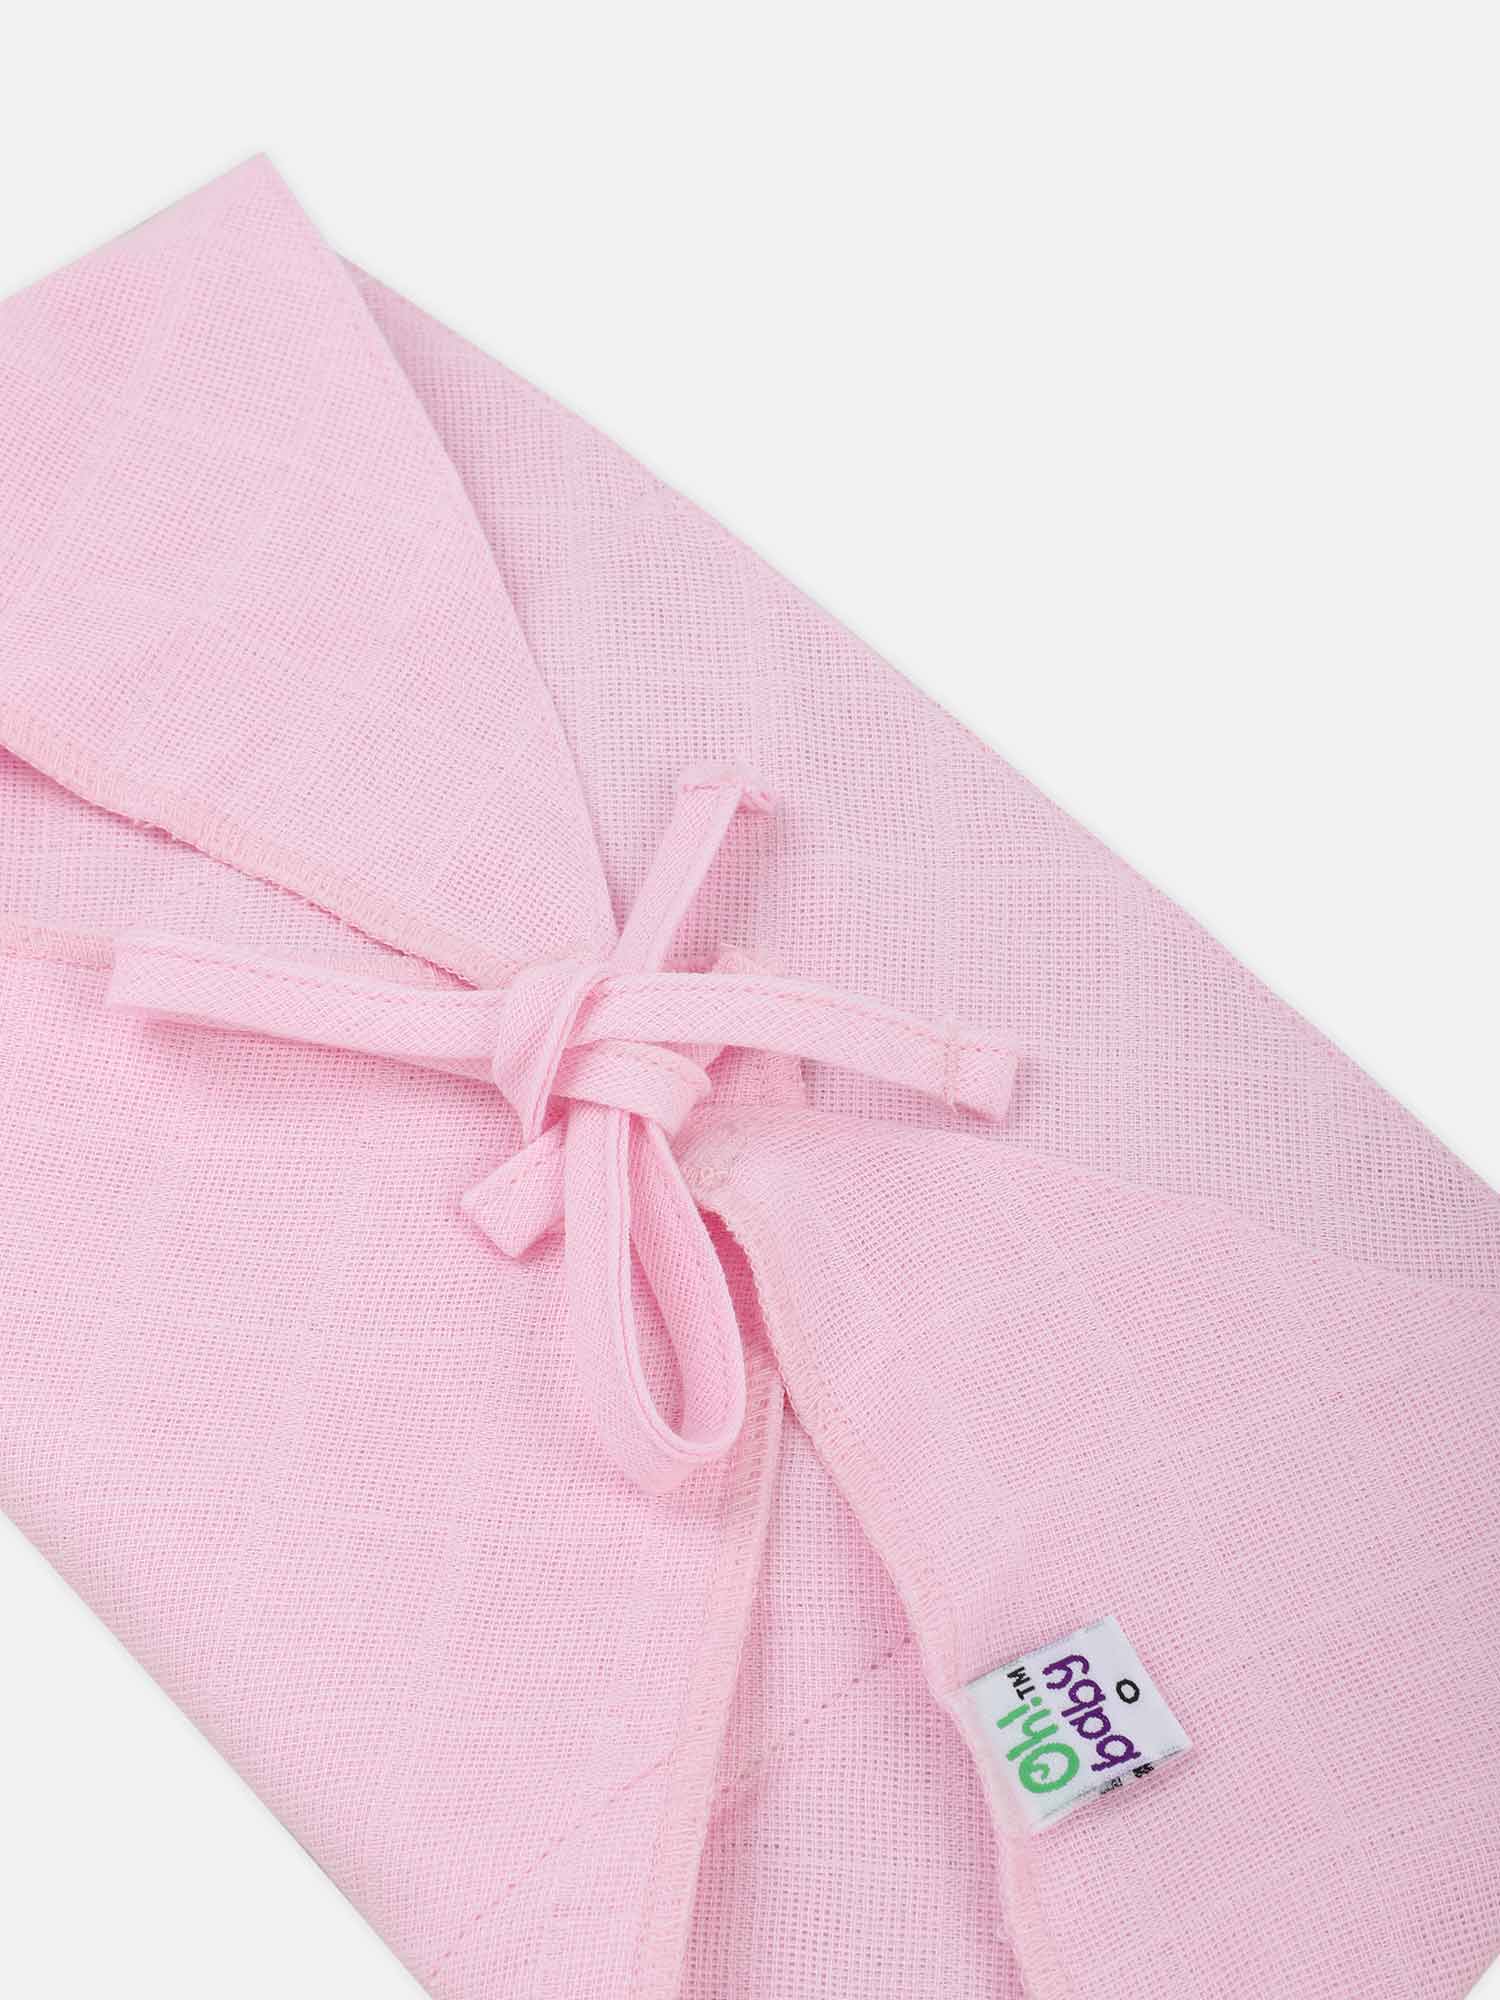 Oh Baby Plain Triangle Nappies Pink - Trpl